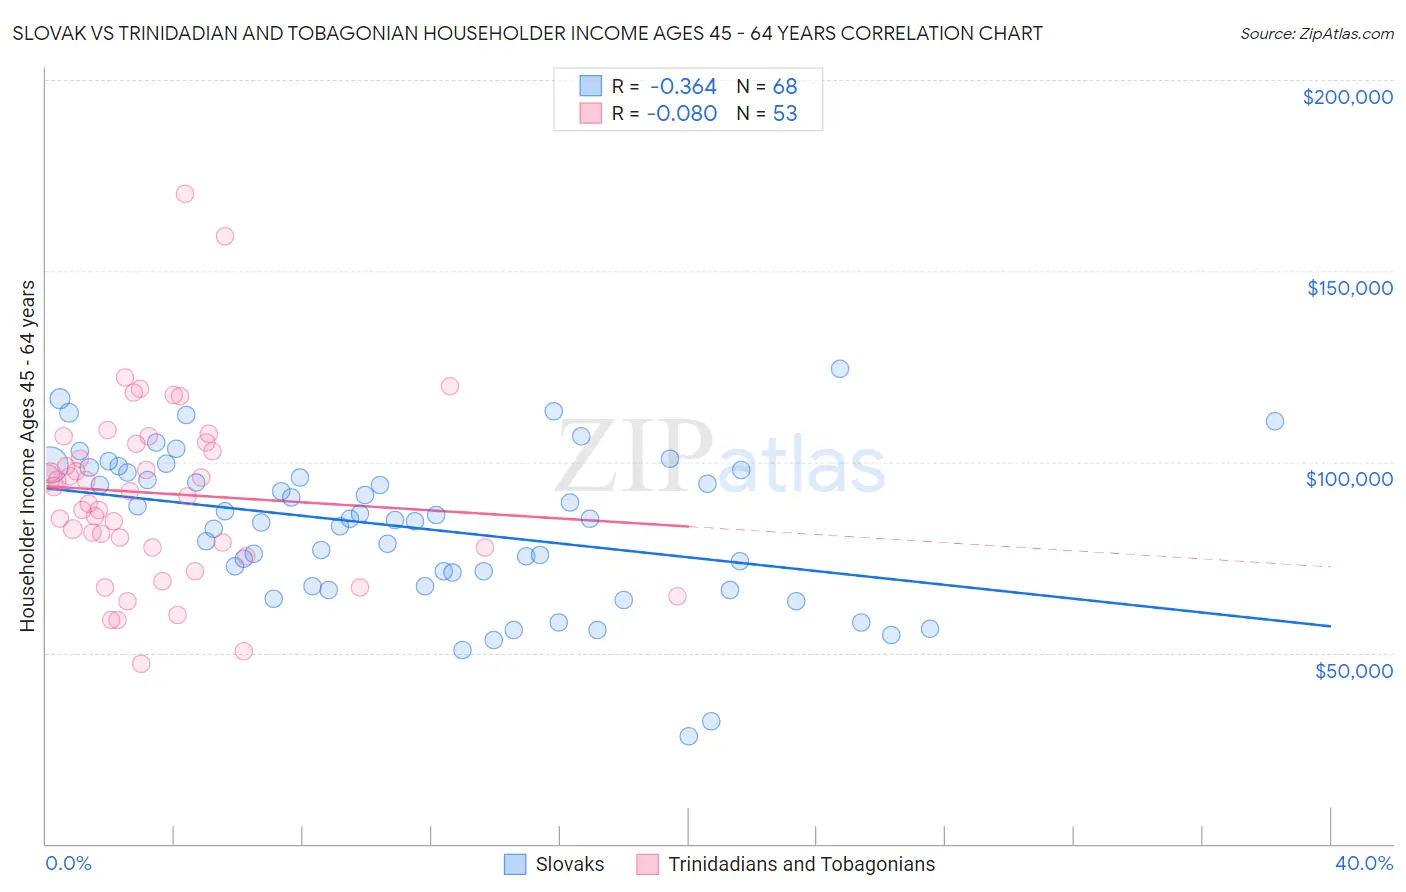 Slovak vs Trinidadian and Tobagonian Householder Income Ages 45 - 64 years